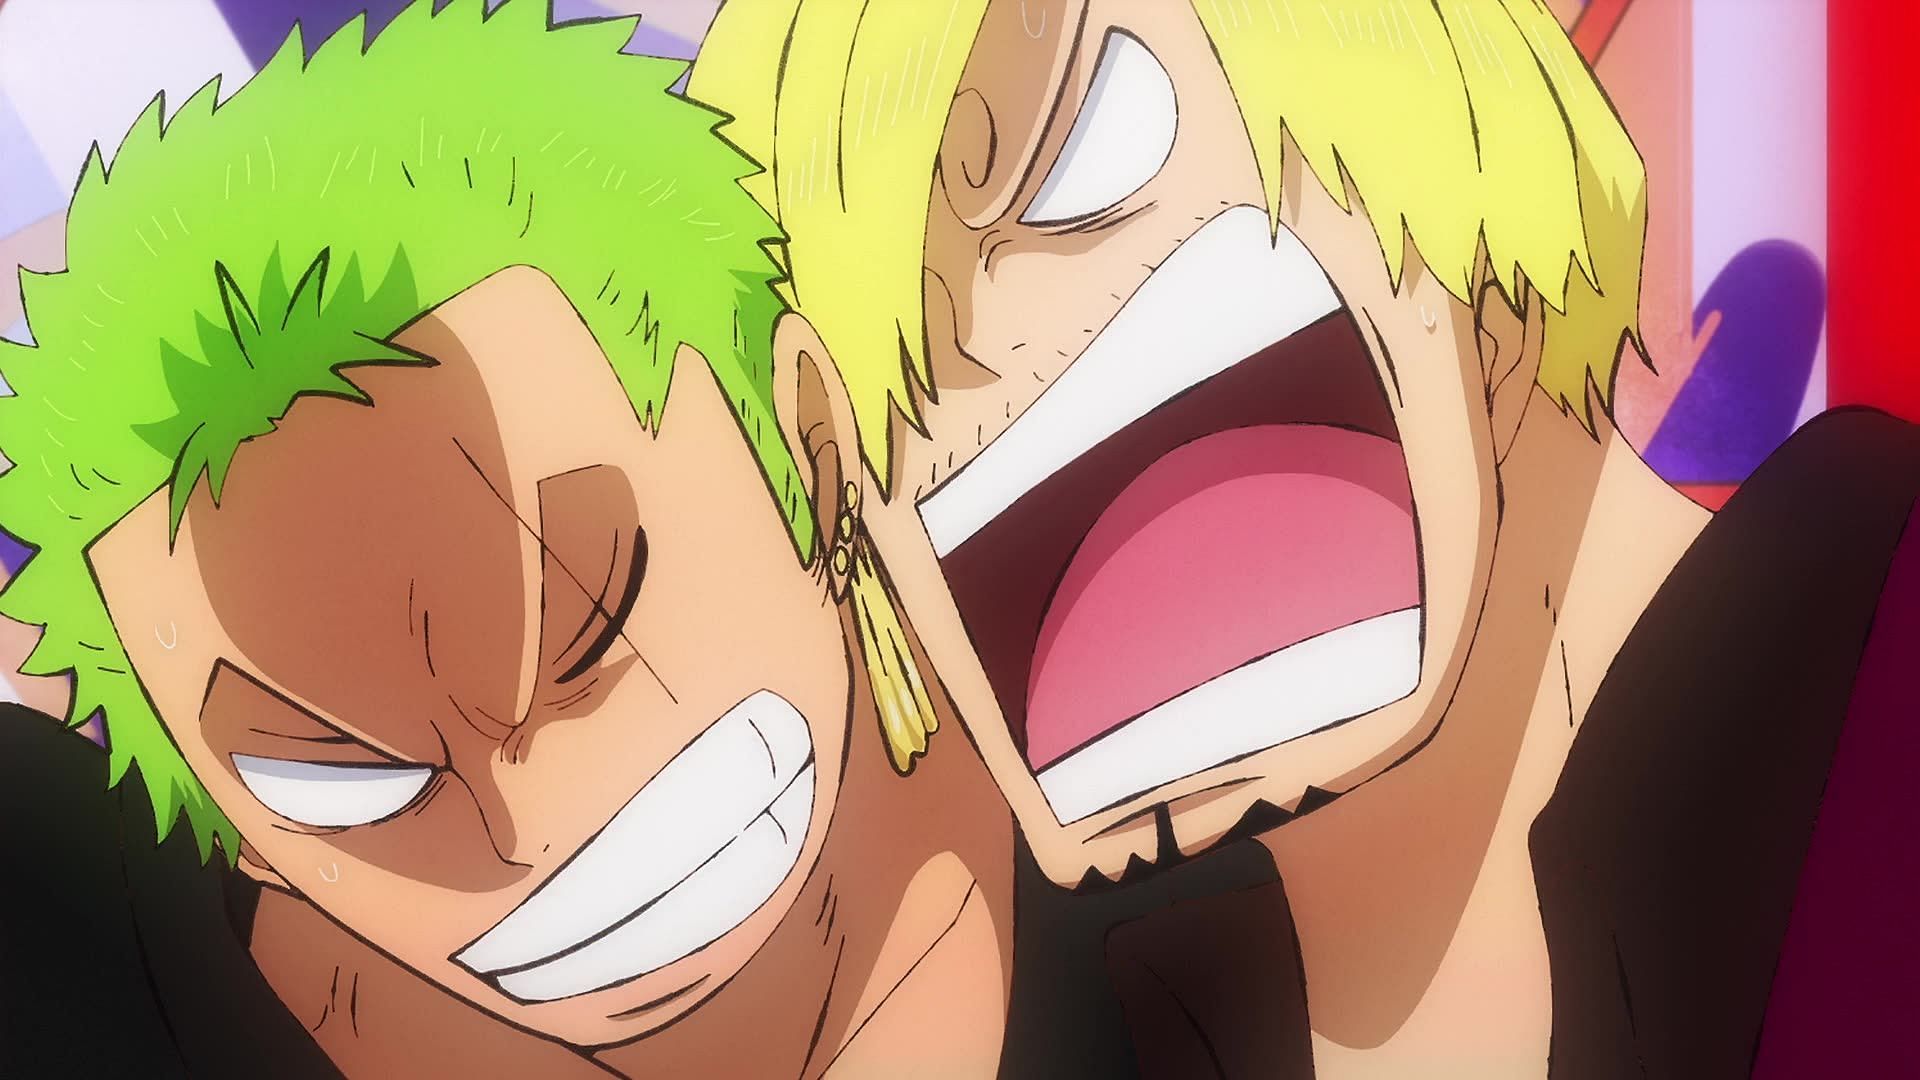 Zoro (left) and Sanji (right) are also constantly at odds with each other, as are many other talents vs hard work anime duos (Image via Toei Animation)